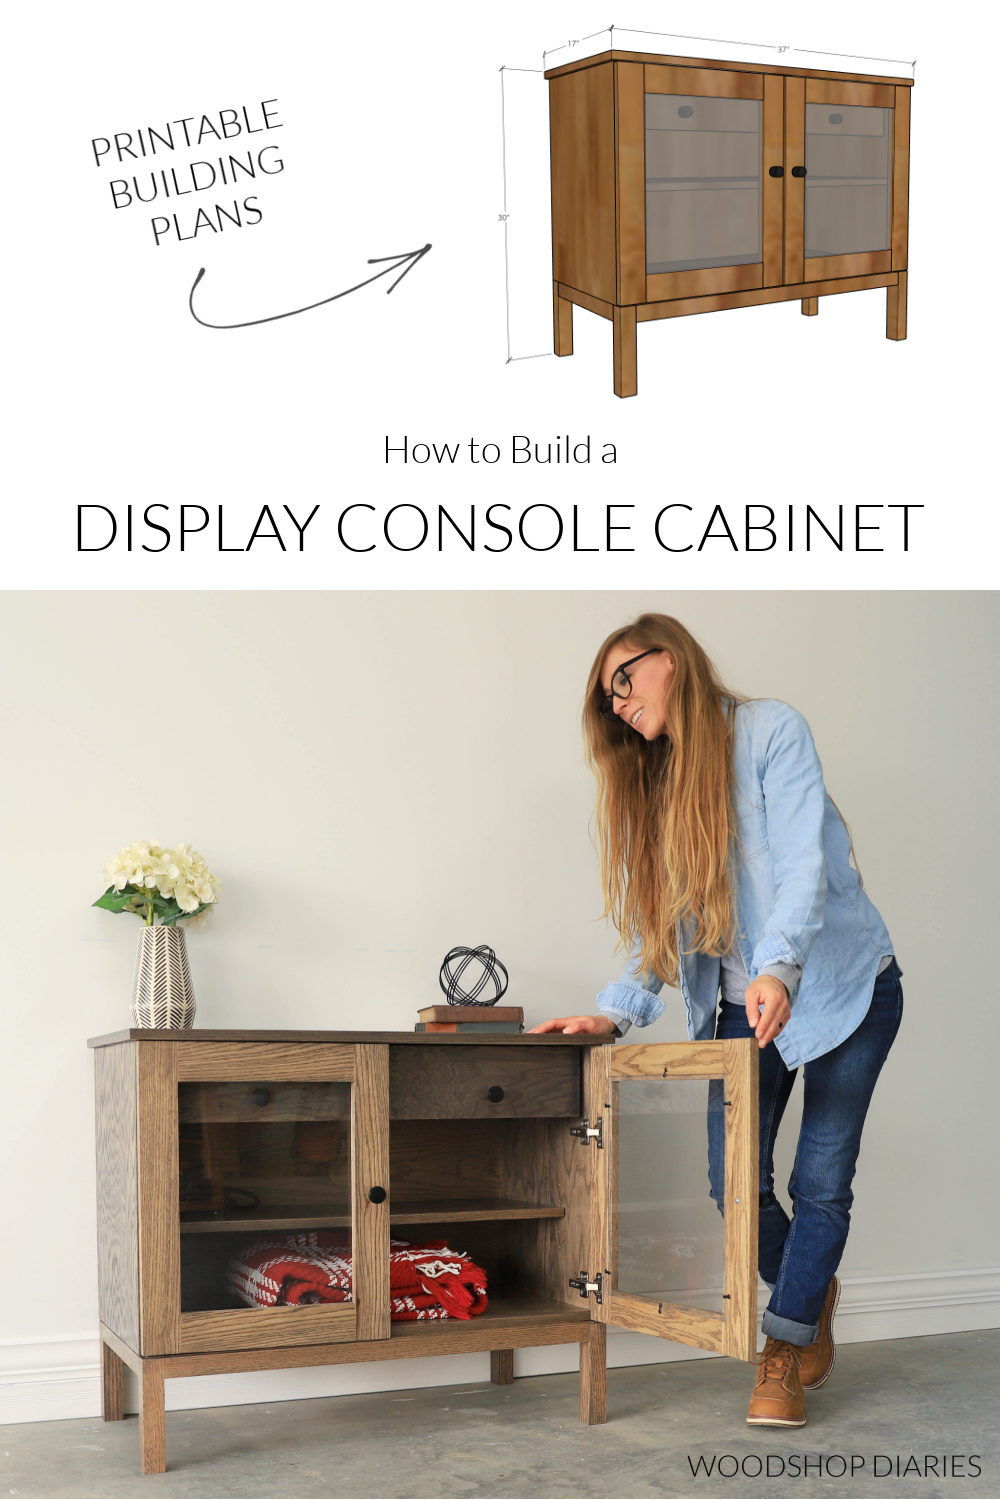 Pinterest collage showing overall dimensions at top and completed DIY display console cabinet at bottom with text "how to build a display console cabinet"